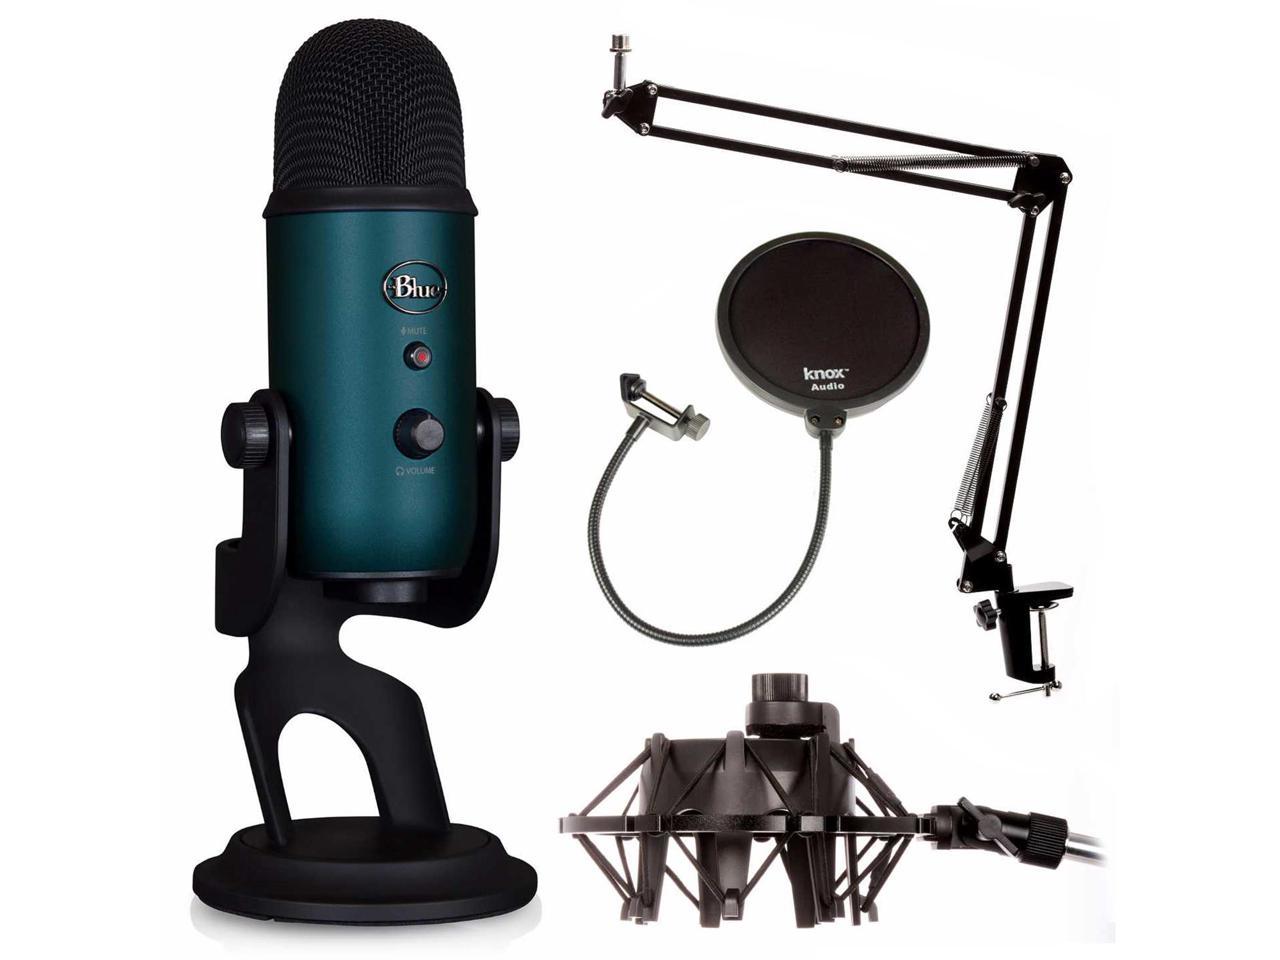 Blue Microphones Teal with Knox Boom Arm, Shock Mount Pop filter - Newegg.com